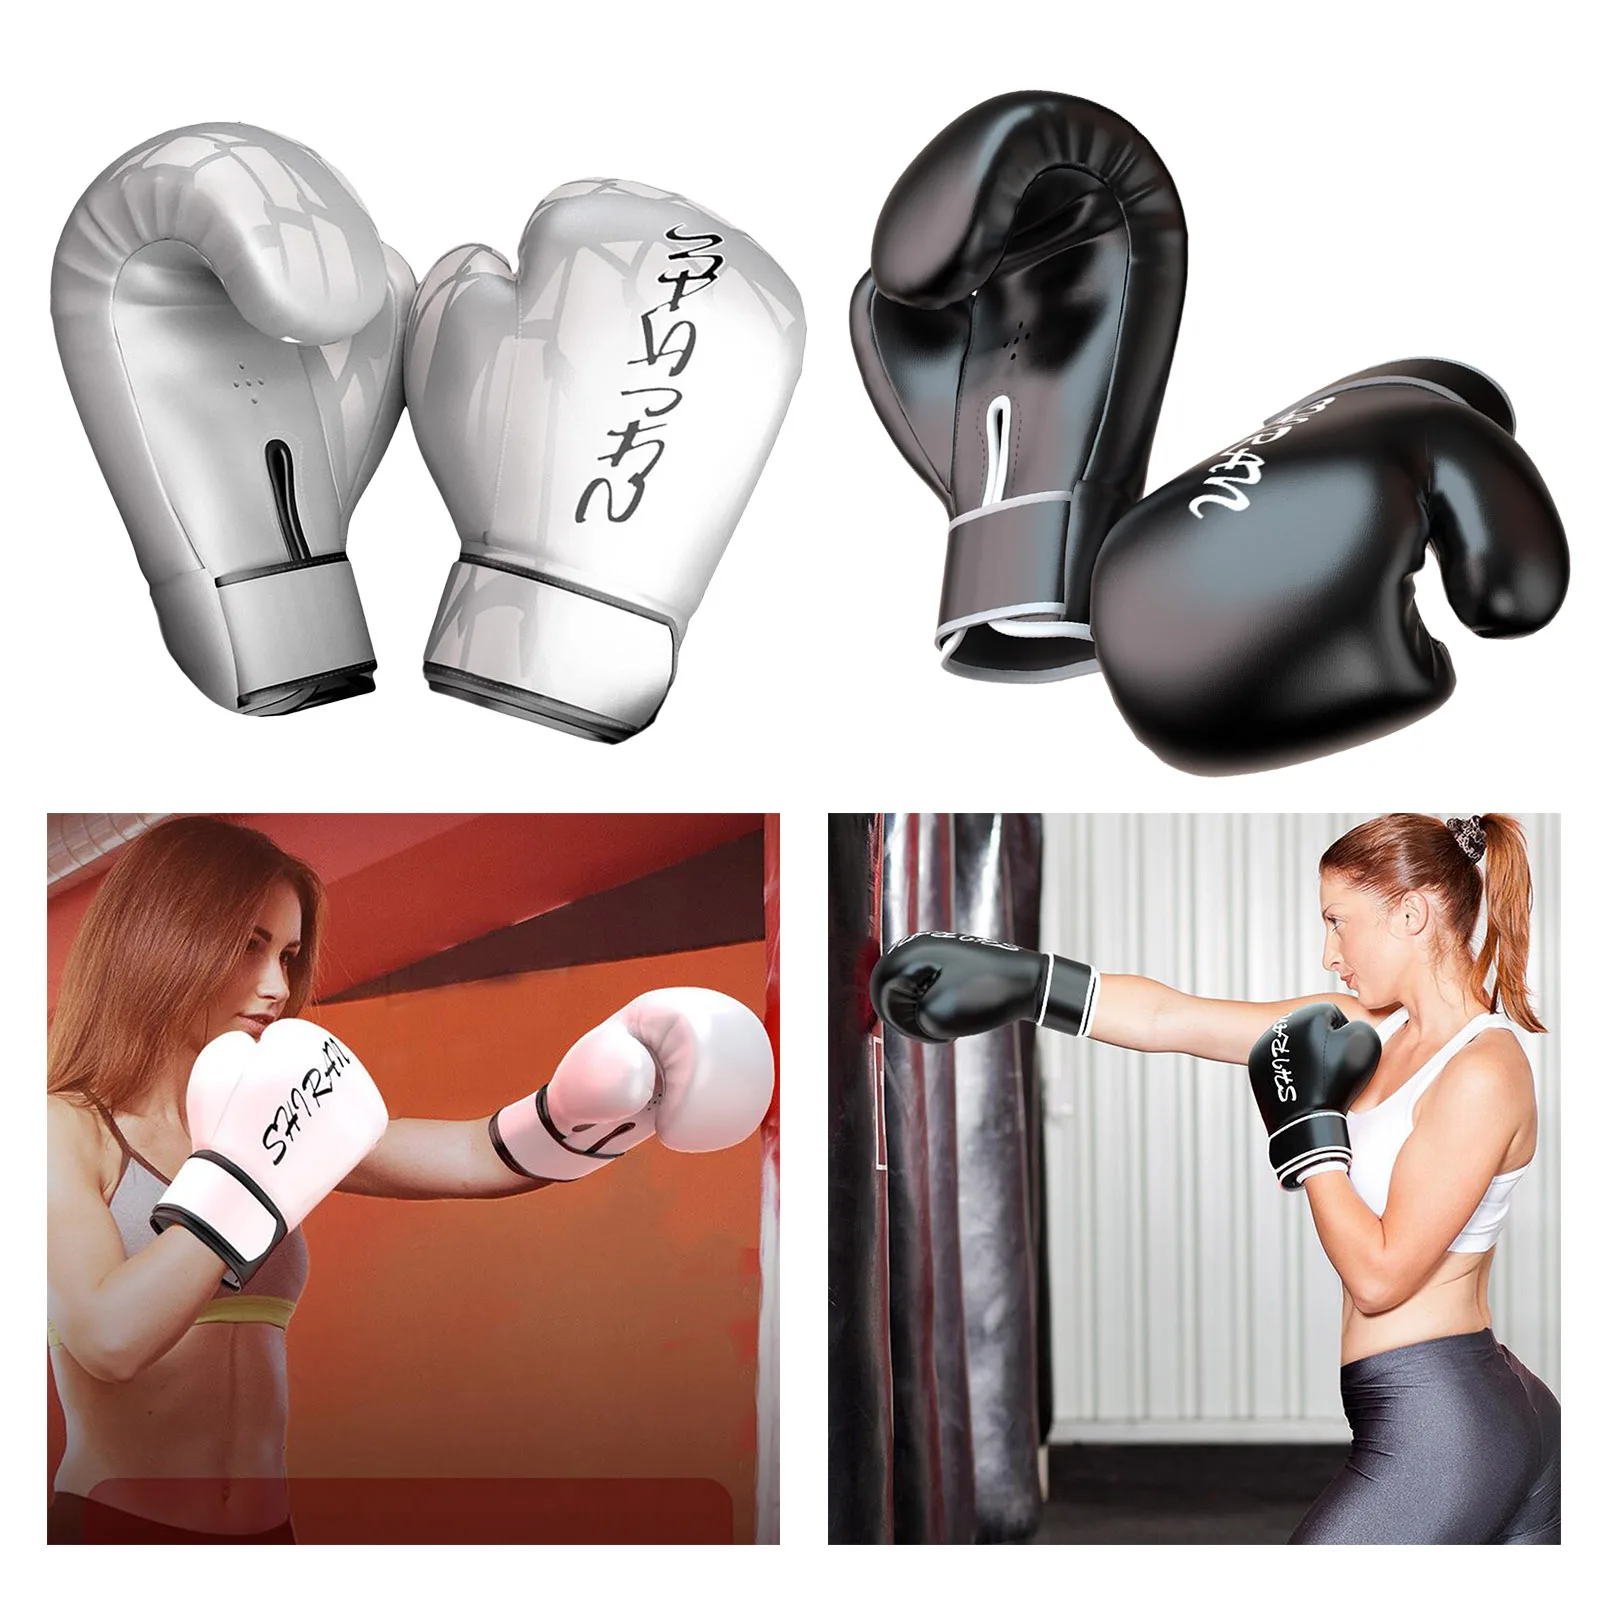 MMA Sparring Punch Bag Muay Thai Training Gloves Pro Real Leather Boxing Glove 